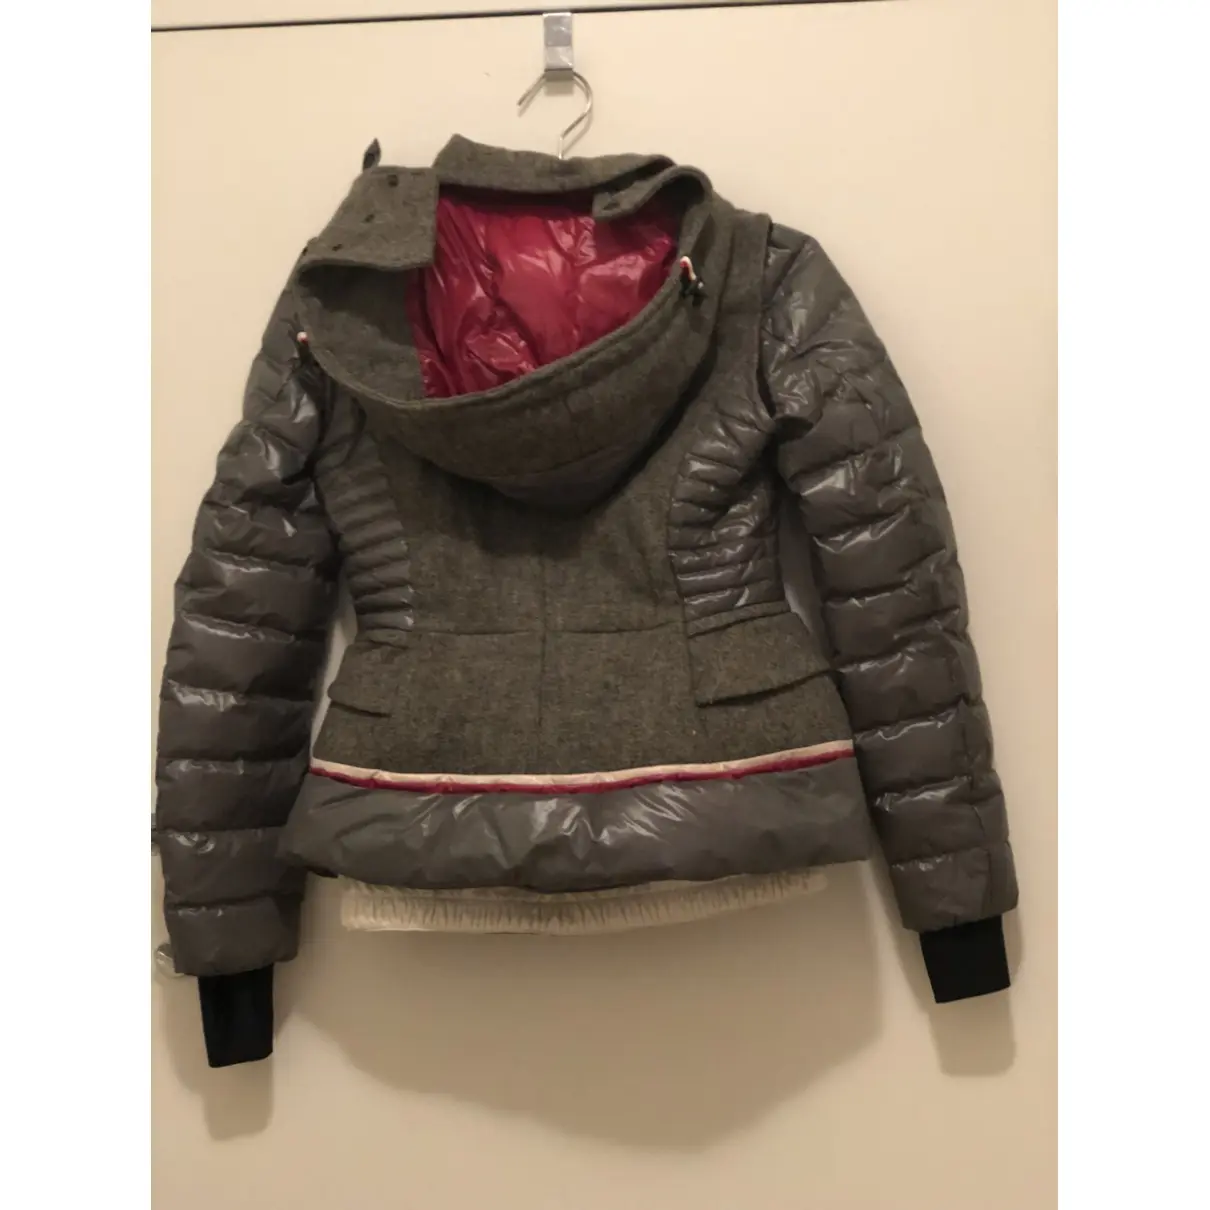 Moncler Grenoble wool puffer for sale